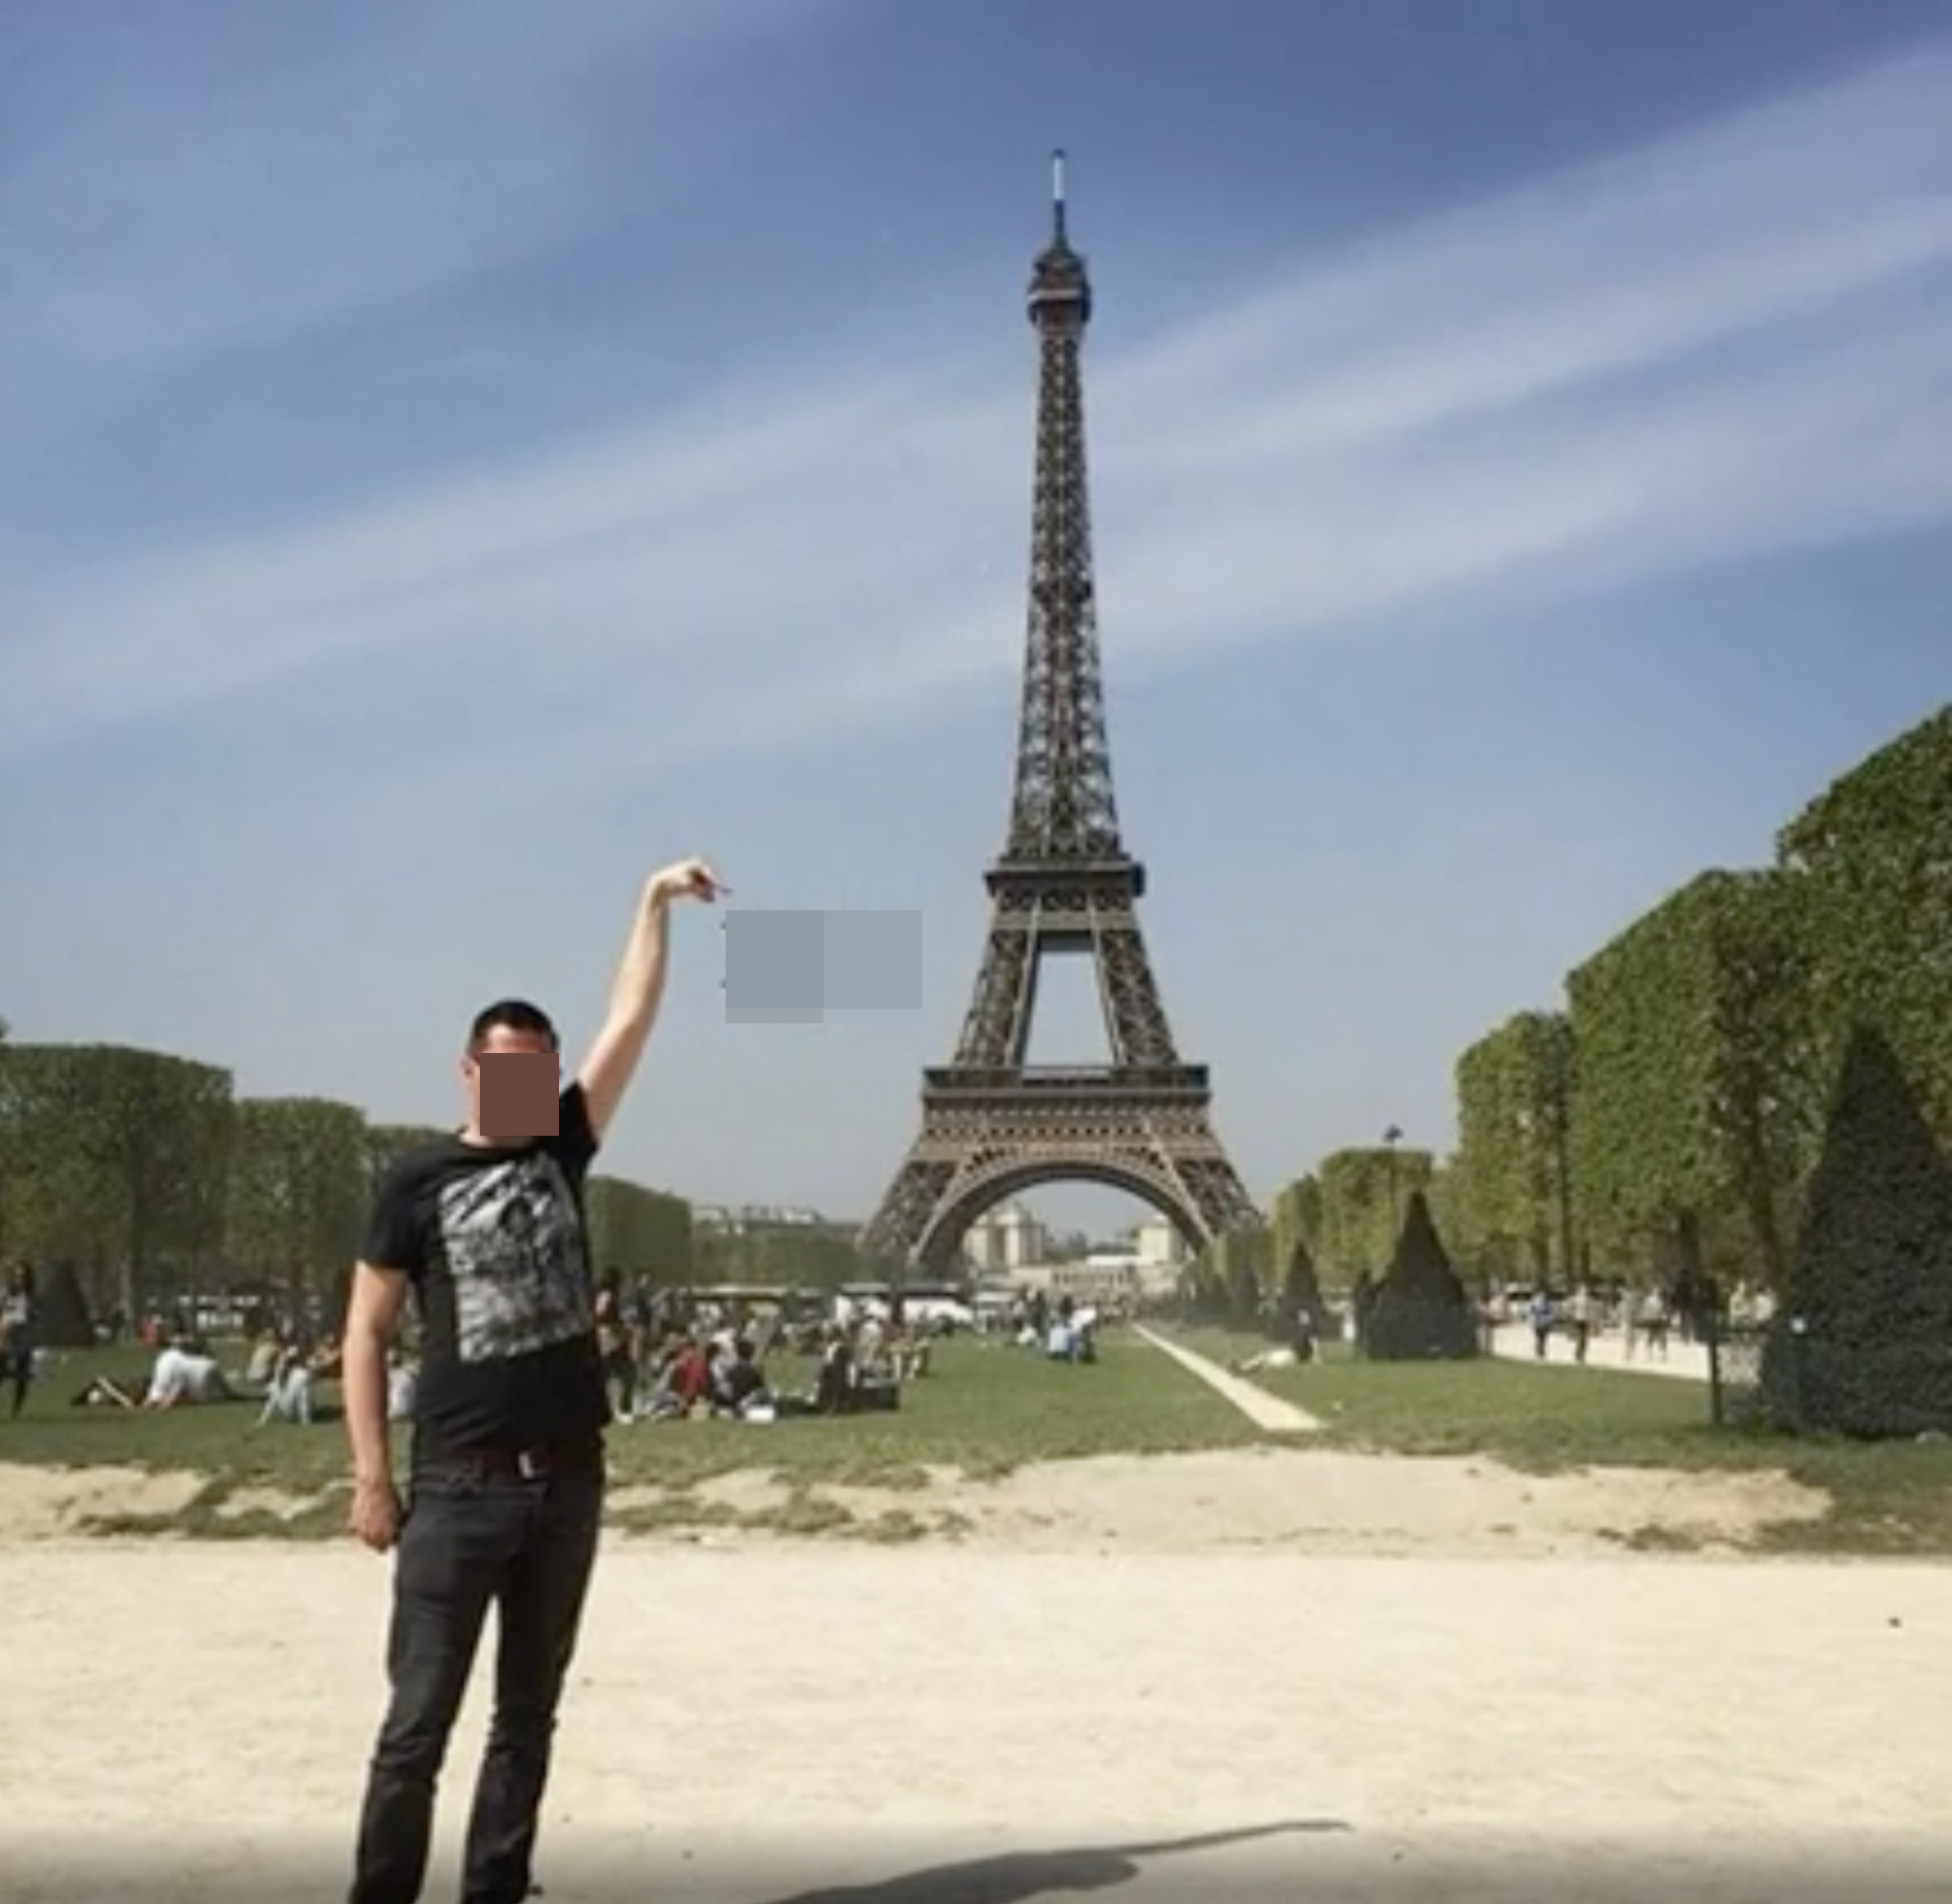 A man posing in front of the Eiffel Tower